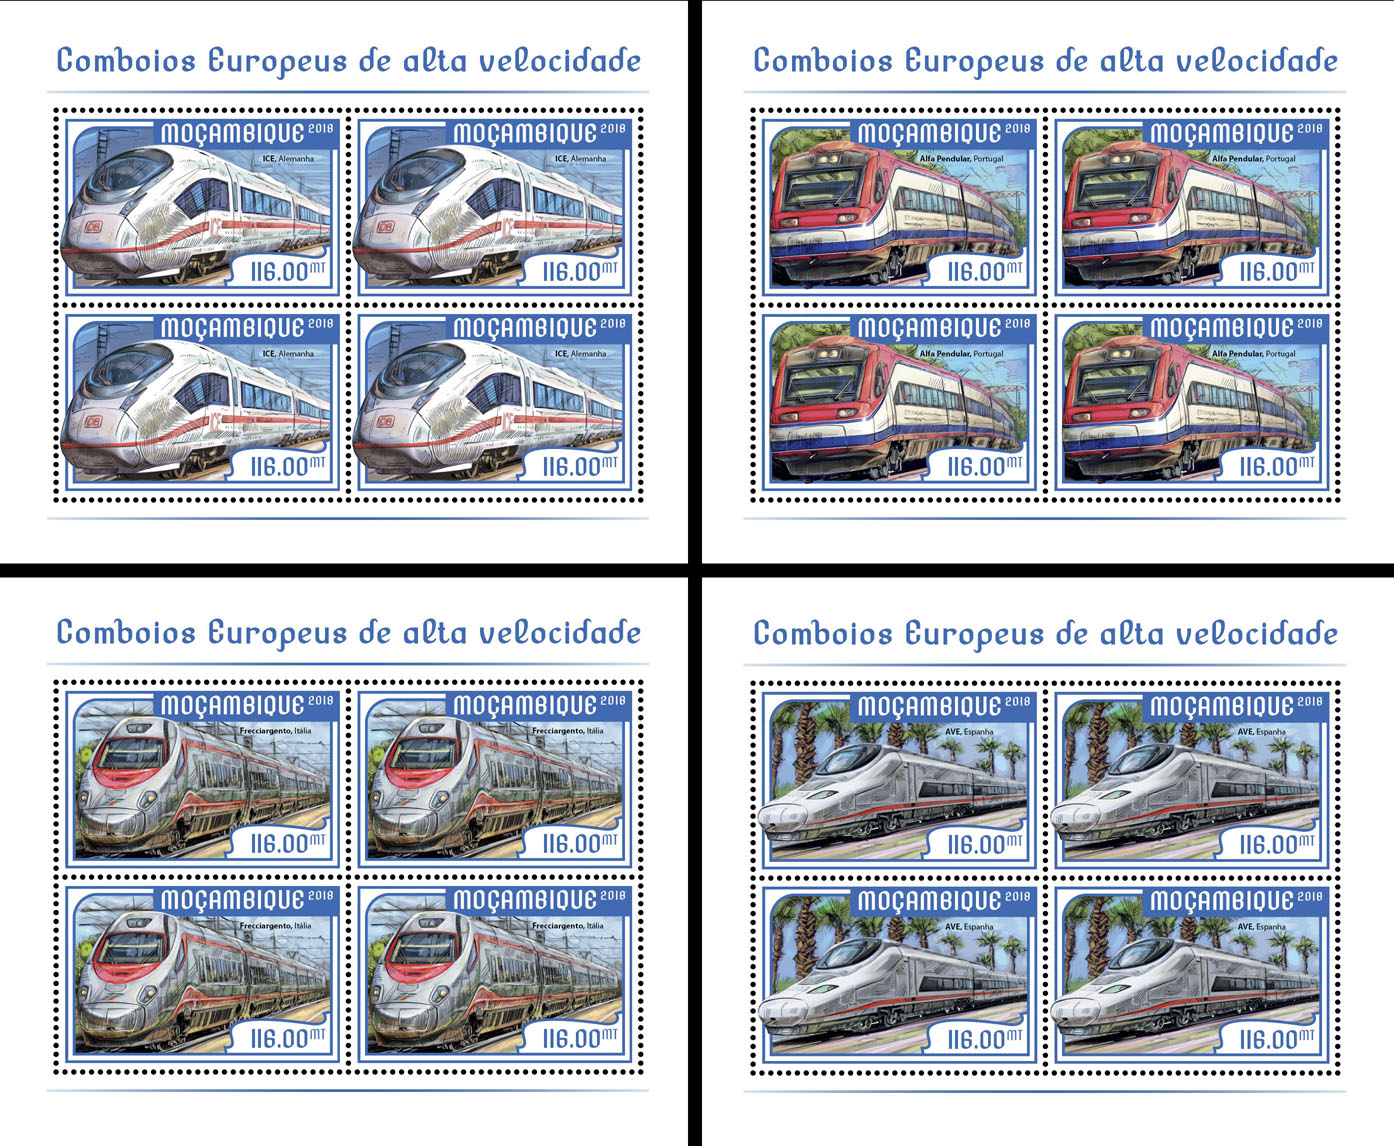 European speed trains (4 sets of 4 stamps) - Issue of Mozambique postage Stamps